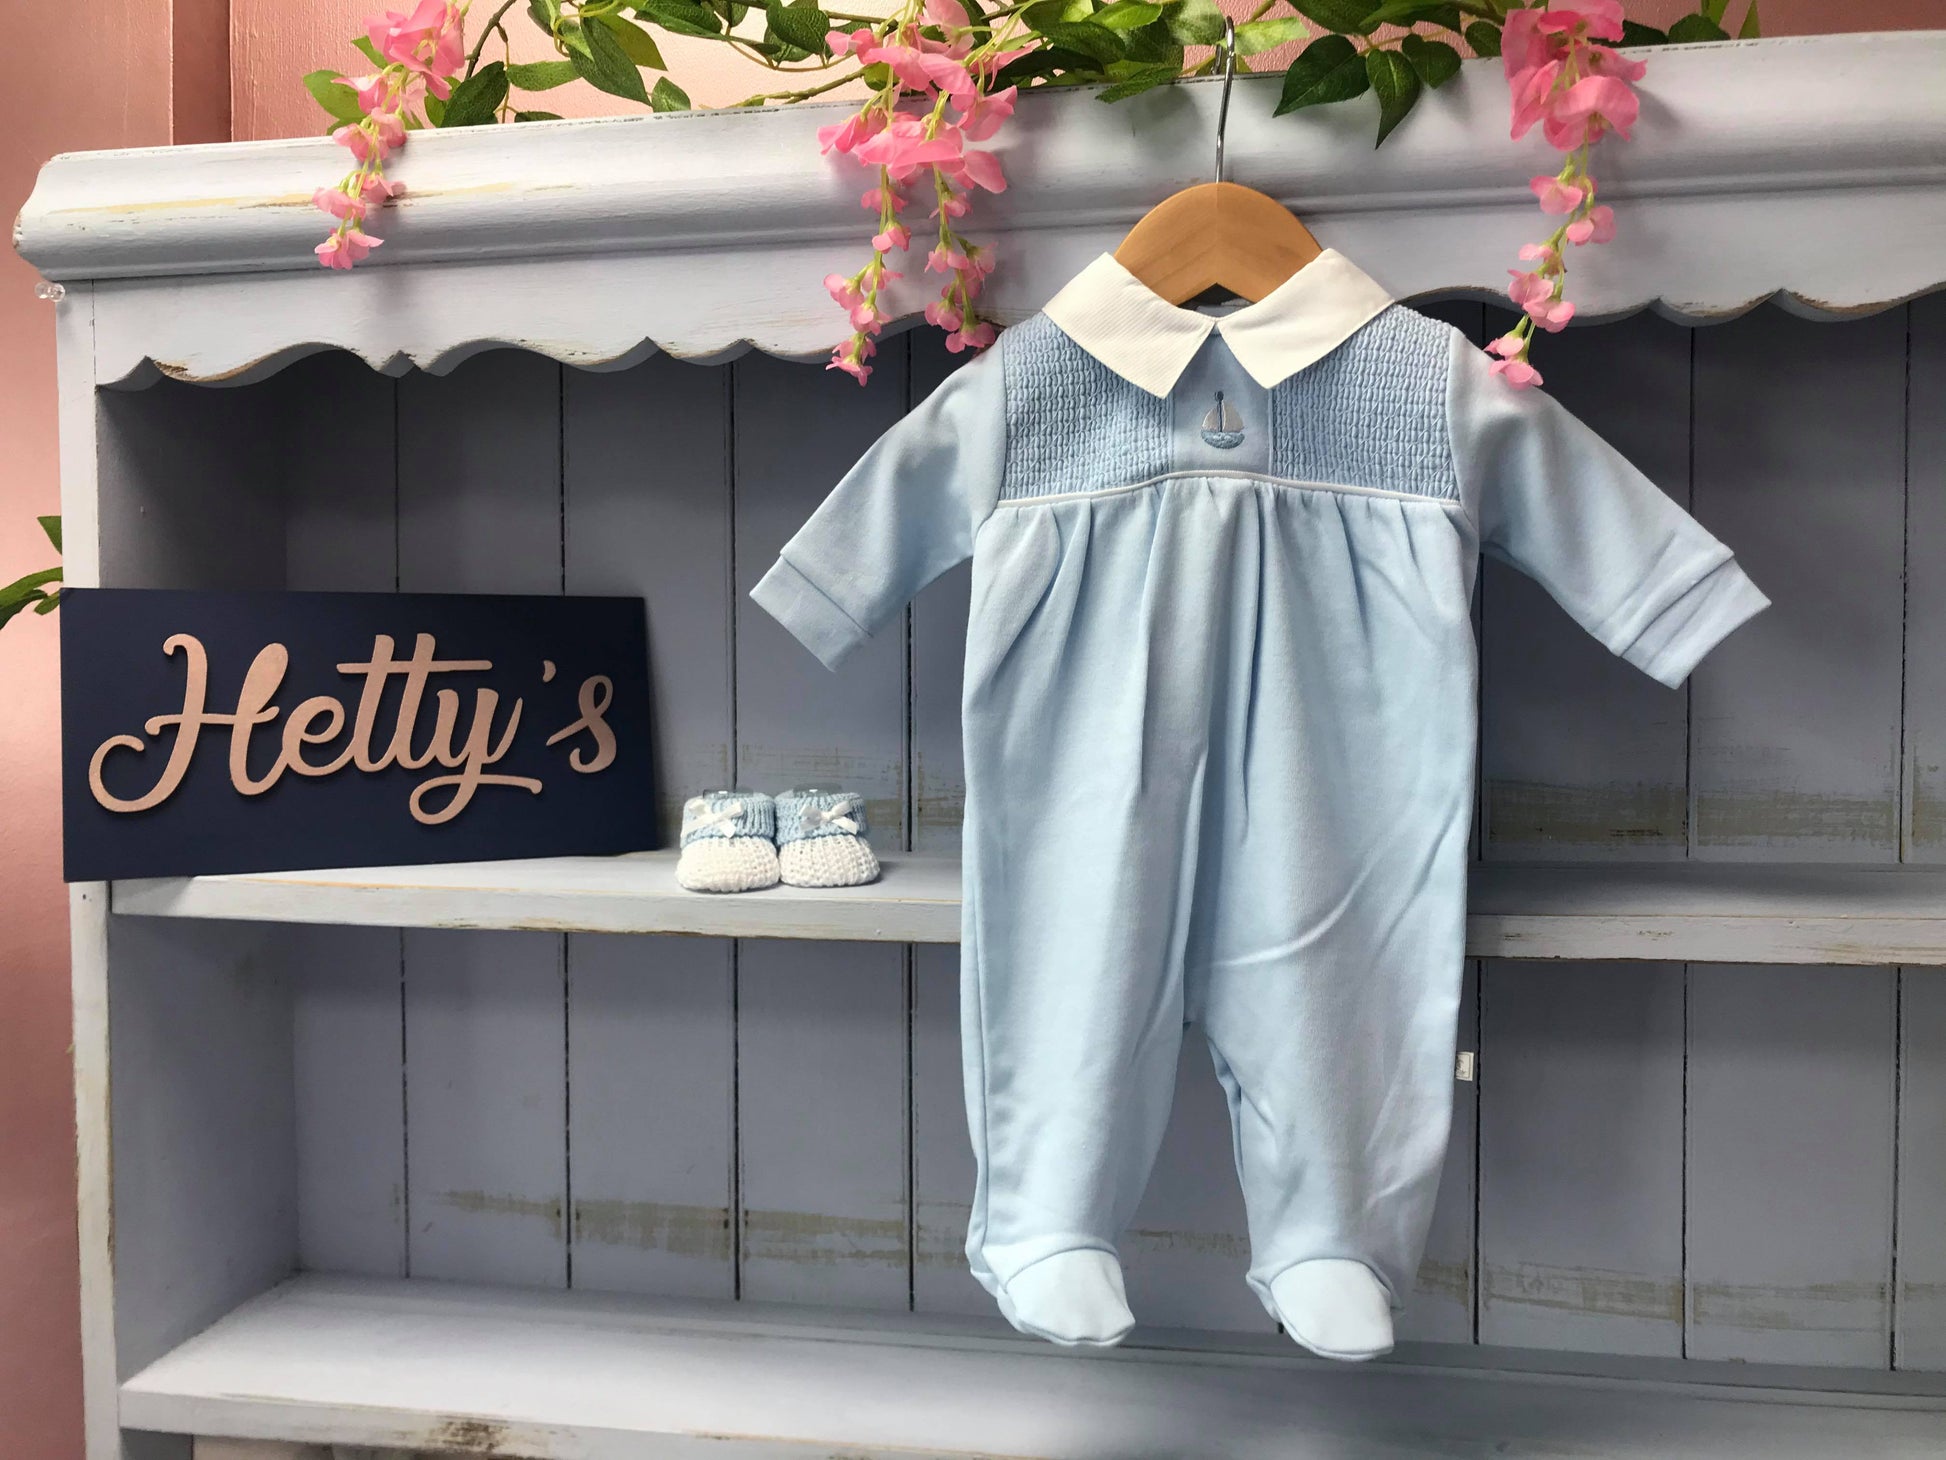 “Ship” Baby Blue Cotton Smock All In One - Hetty's Baby Boutique